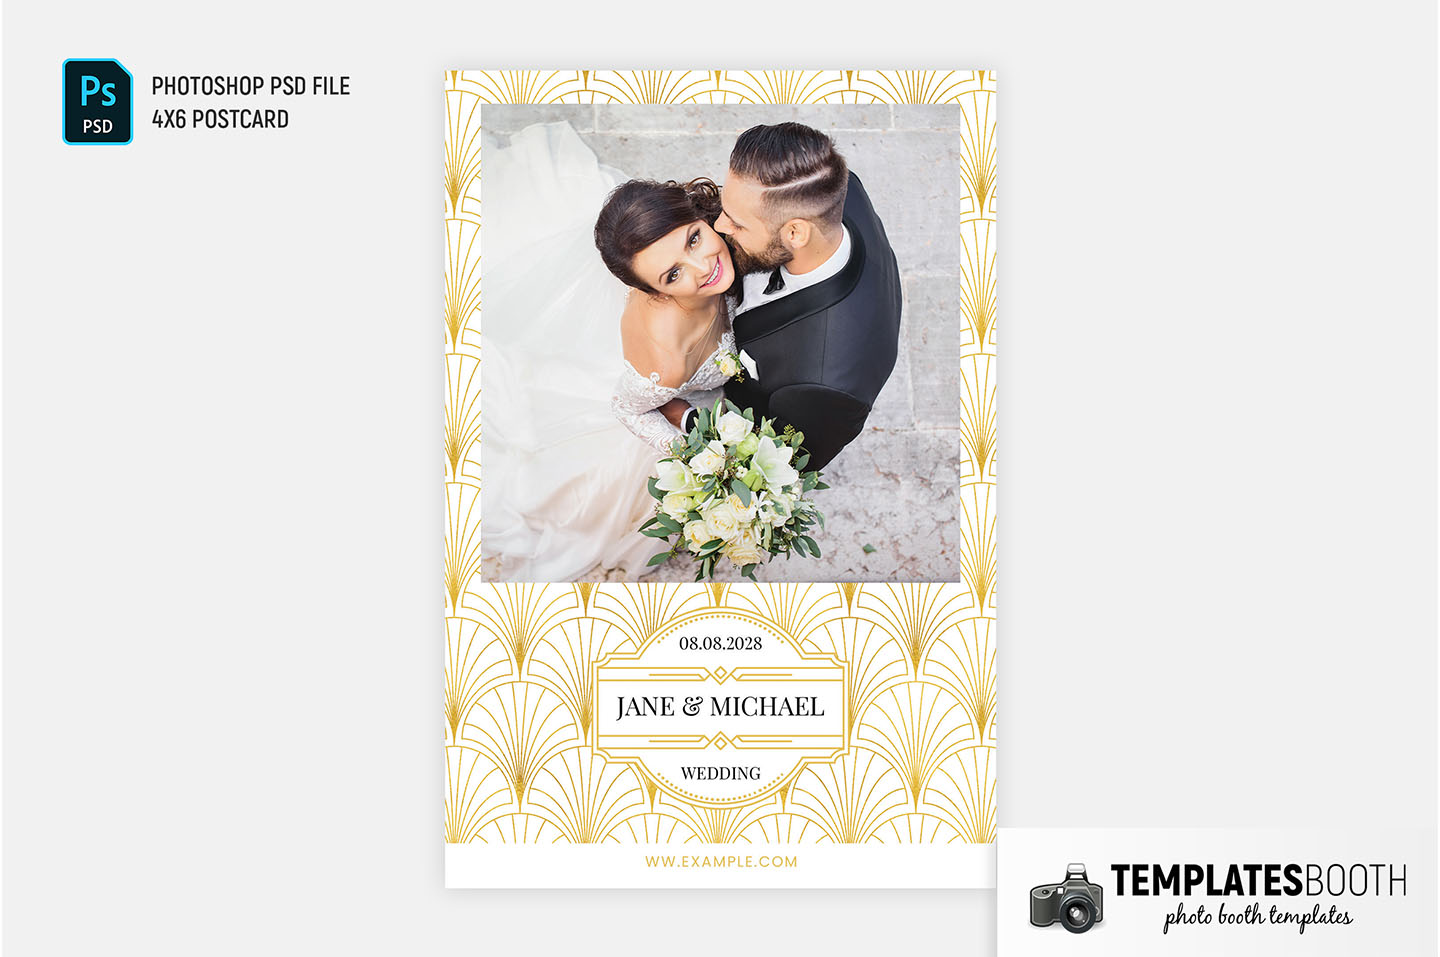 Art Deco Photo Booth Template (Photoshop PSD & DSLR Booth)